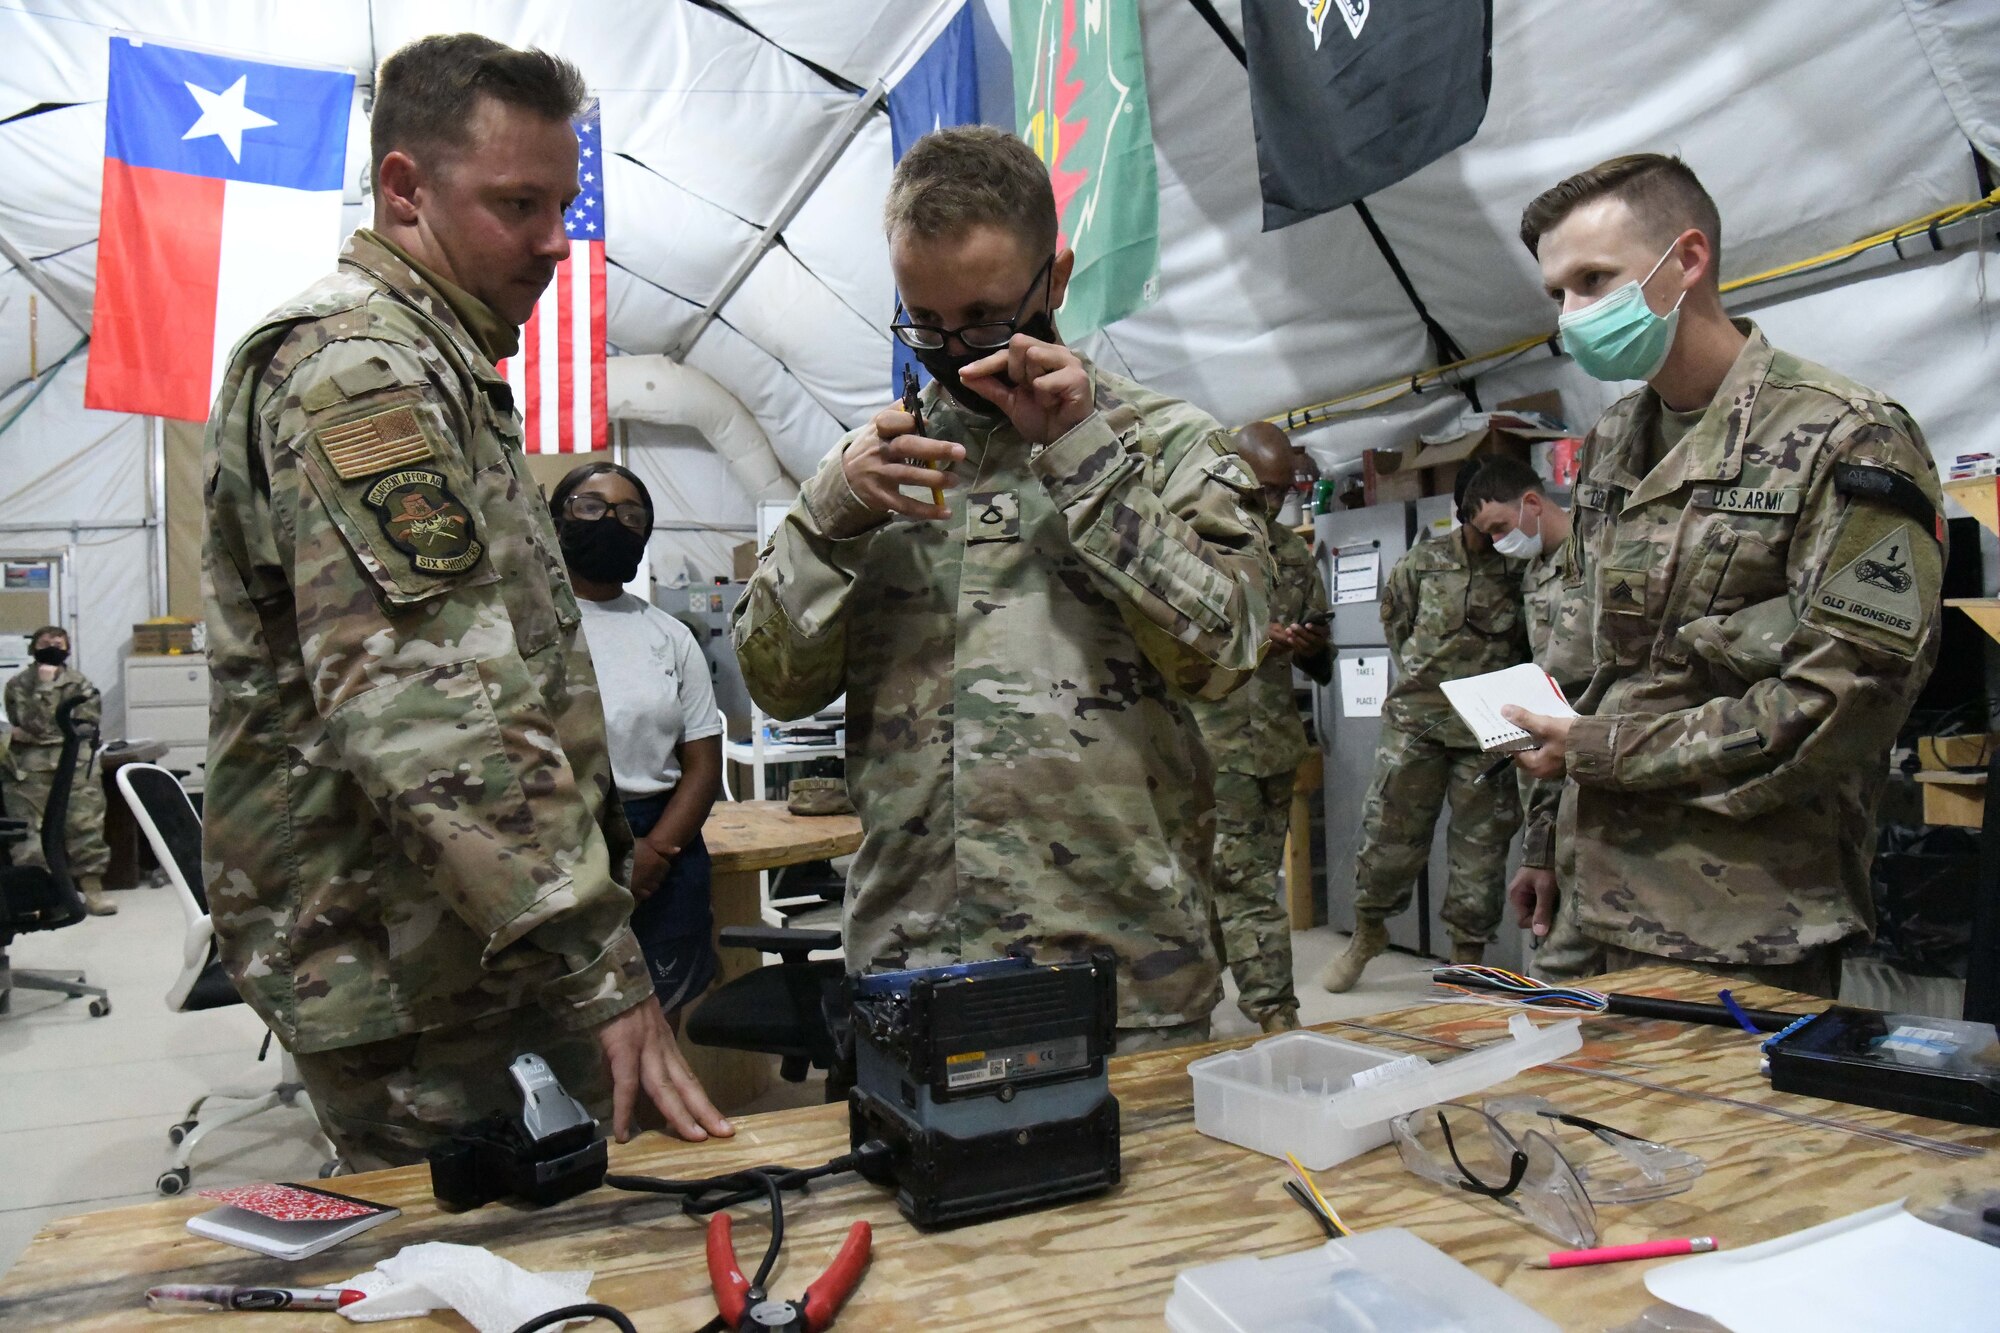 Airmen in Action program aims to increase interoperability